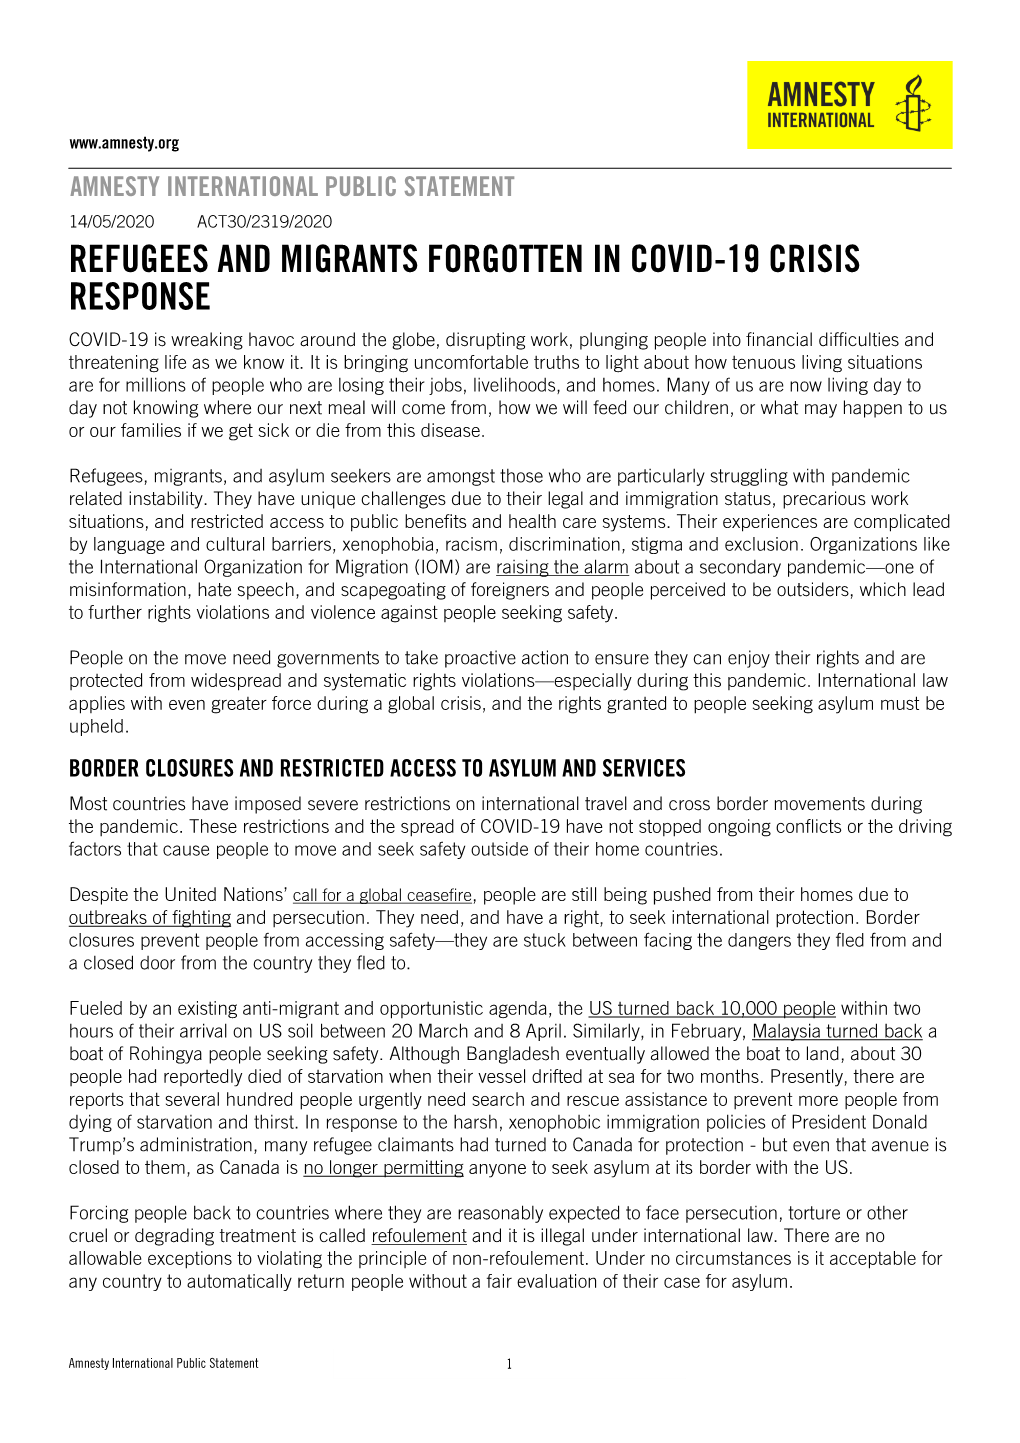 Refugees and Migrants Forgotten in COVID-19 Crisis Response